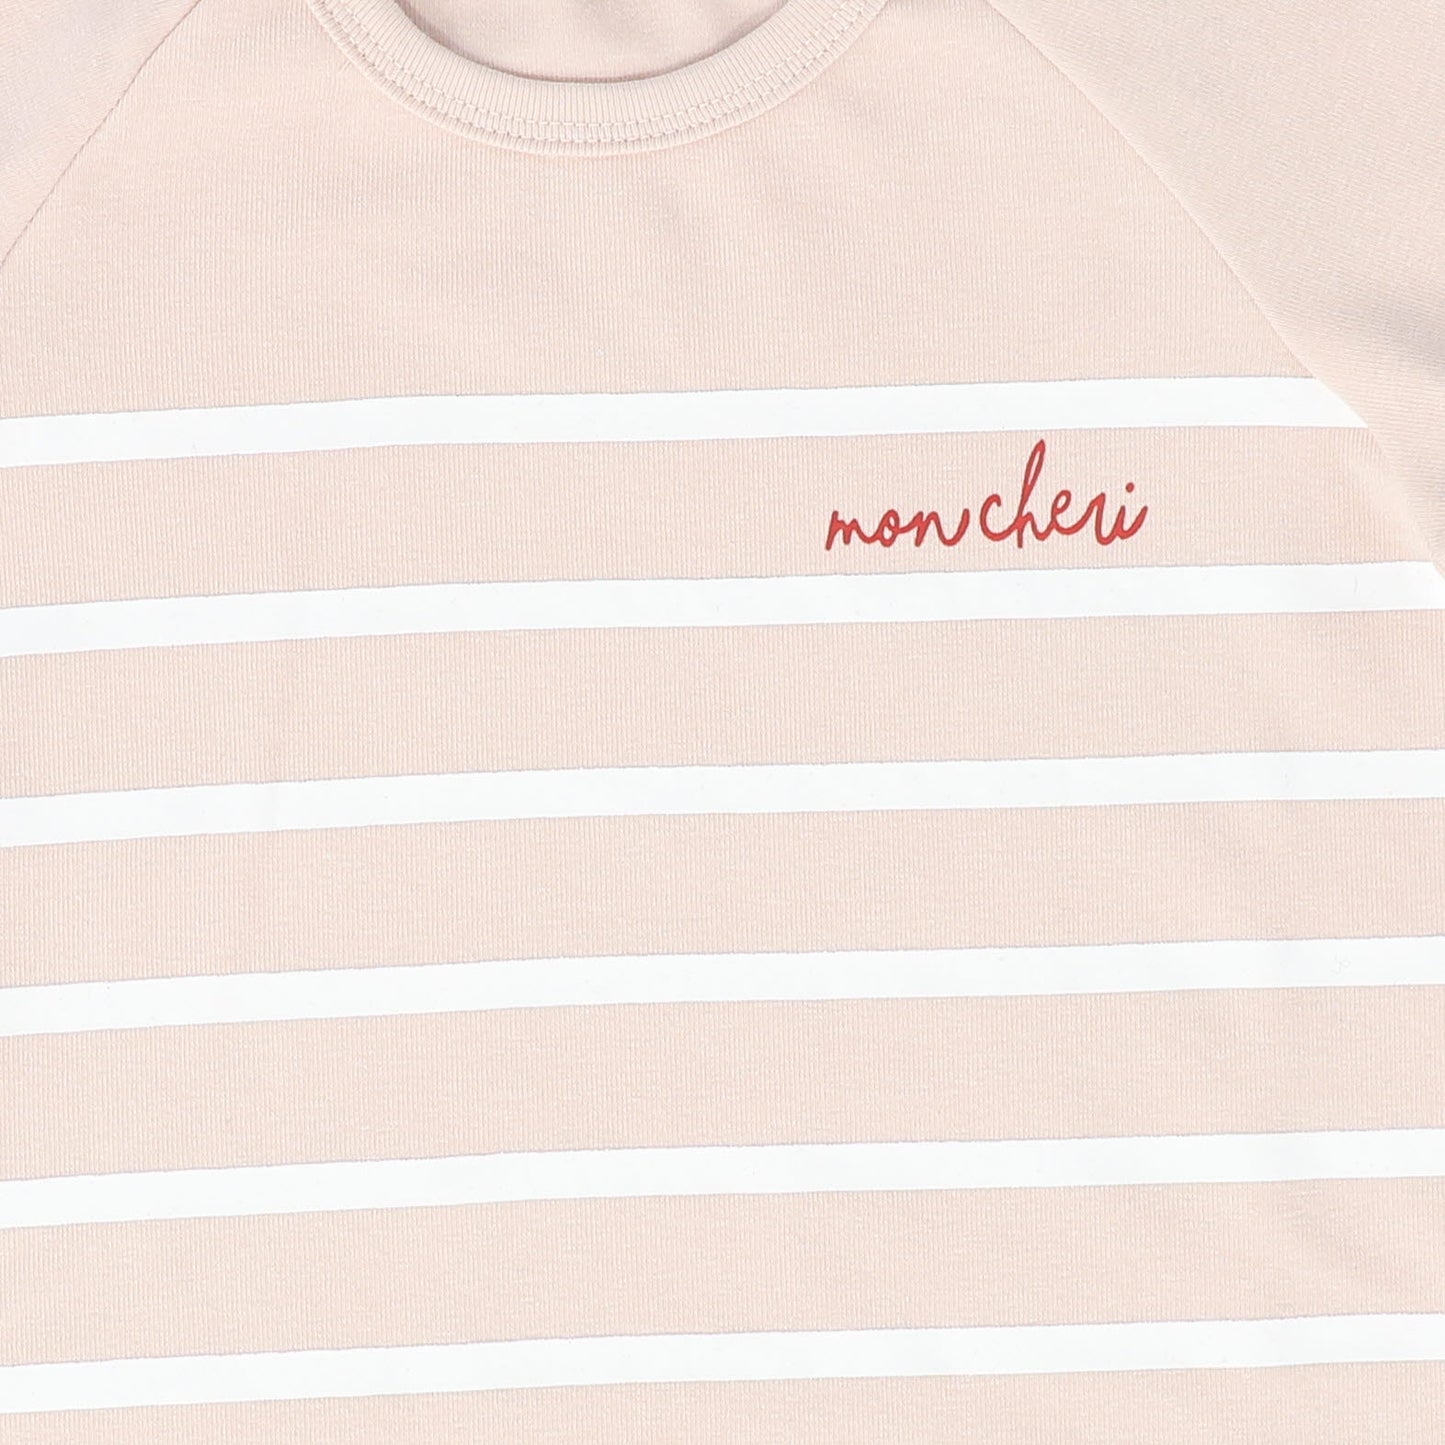 BAMBOO PINK STRIPED SS TEE